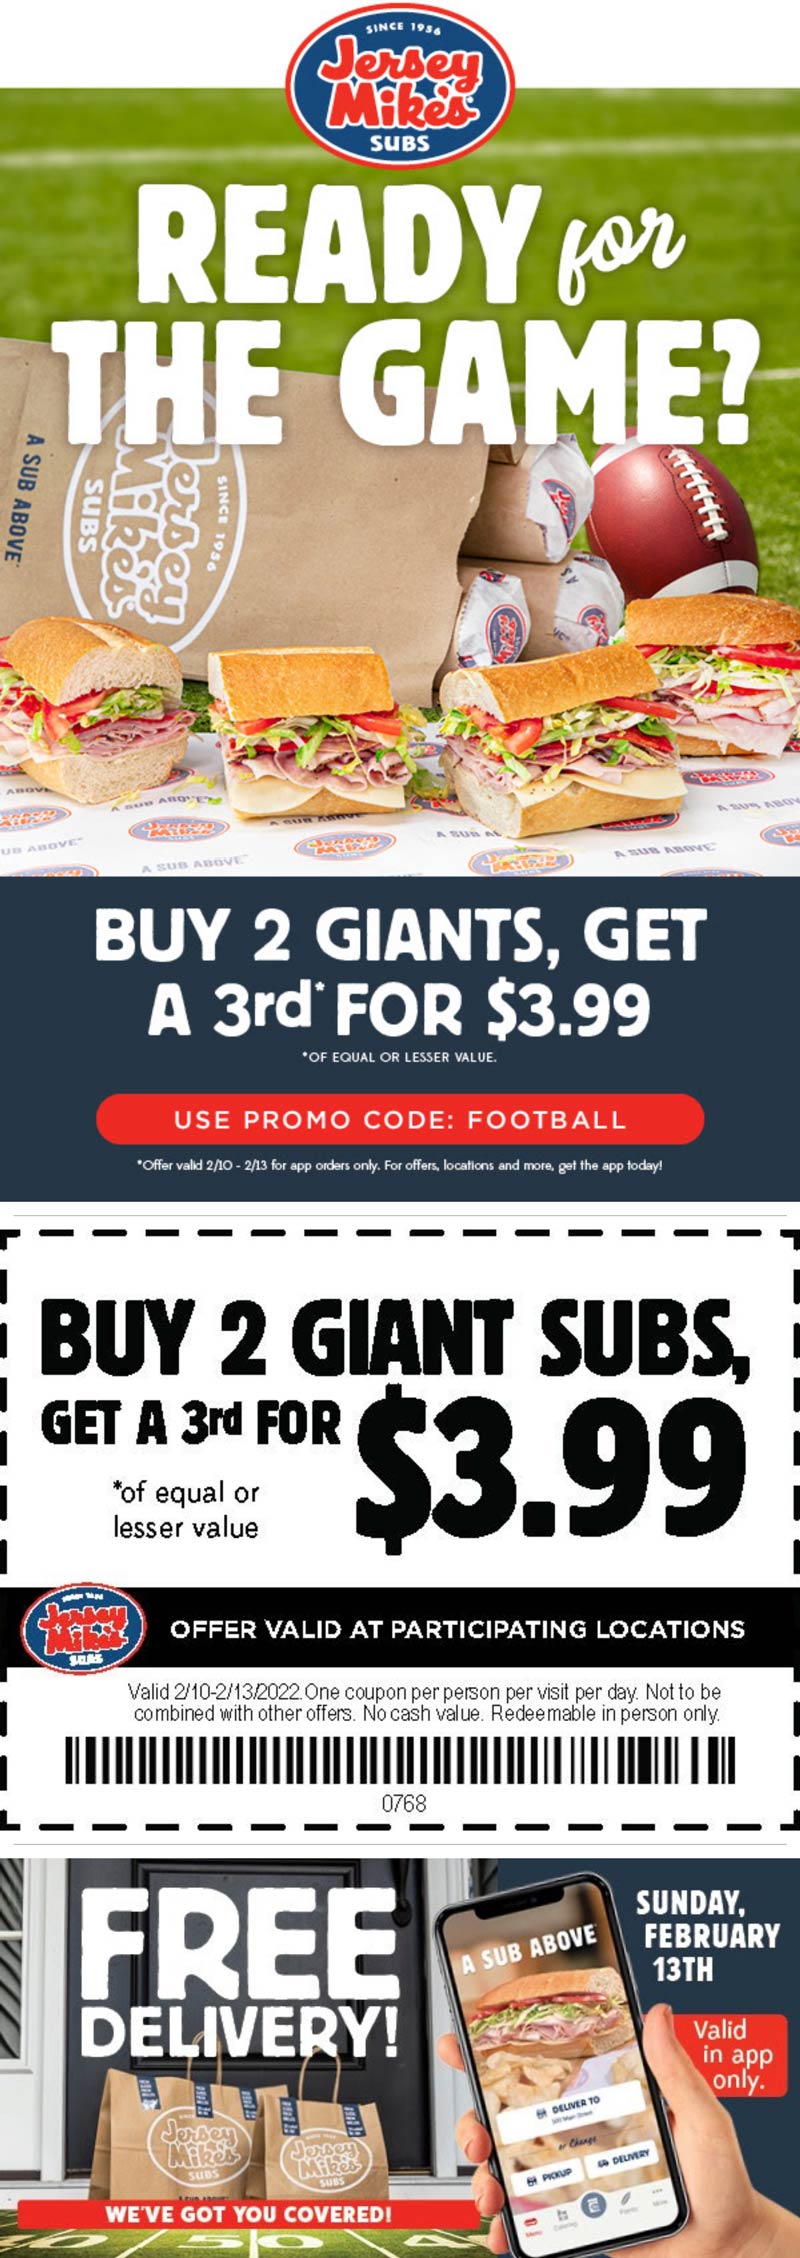 Jersey Mikes coupons & promo code for [November 2022]